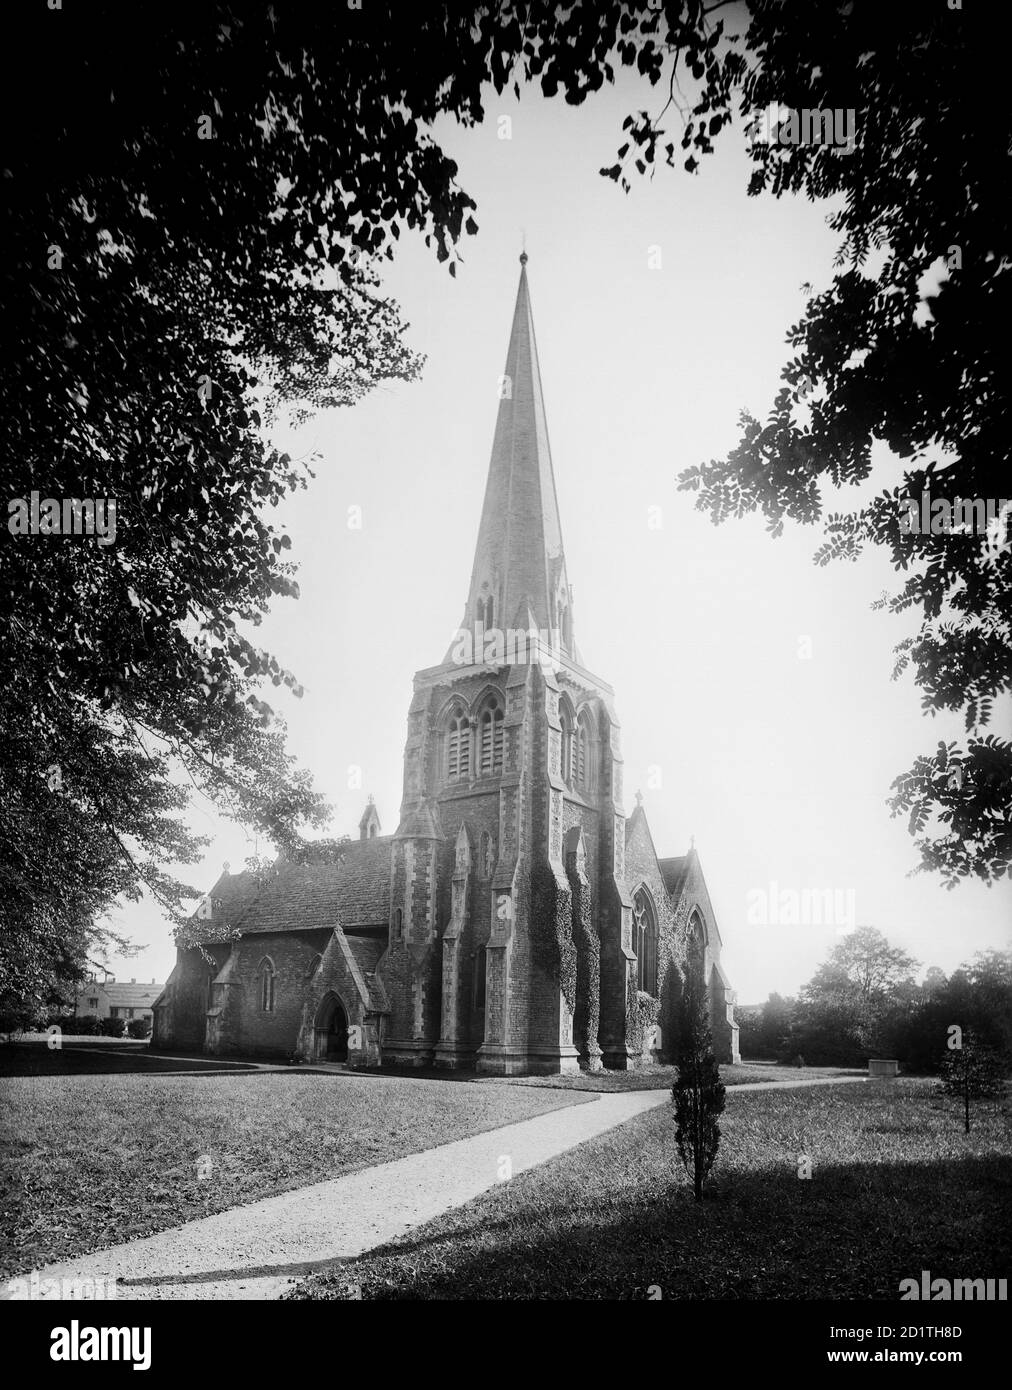 HOLY TRINITY CHURCH, Cirencester, Gloucestershire. The church exterior from the north-west. Made from Forest Marble and with a stone roof, it was designed by Sir George Gilbert Scott and built in 1850-1. Photographed in 1890 by Henry Taunt. Stock Photo